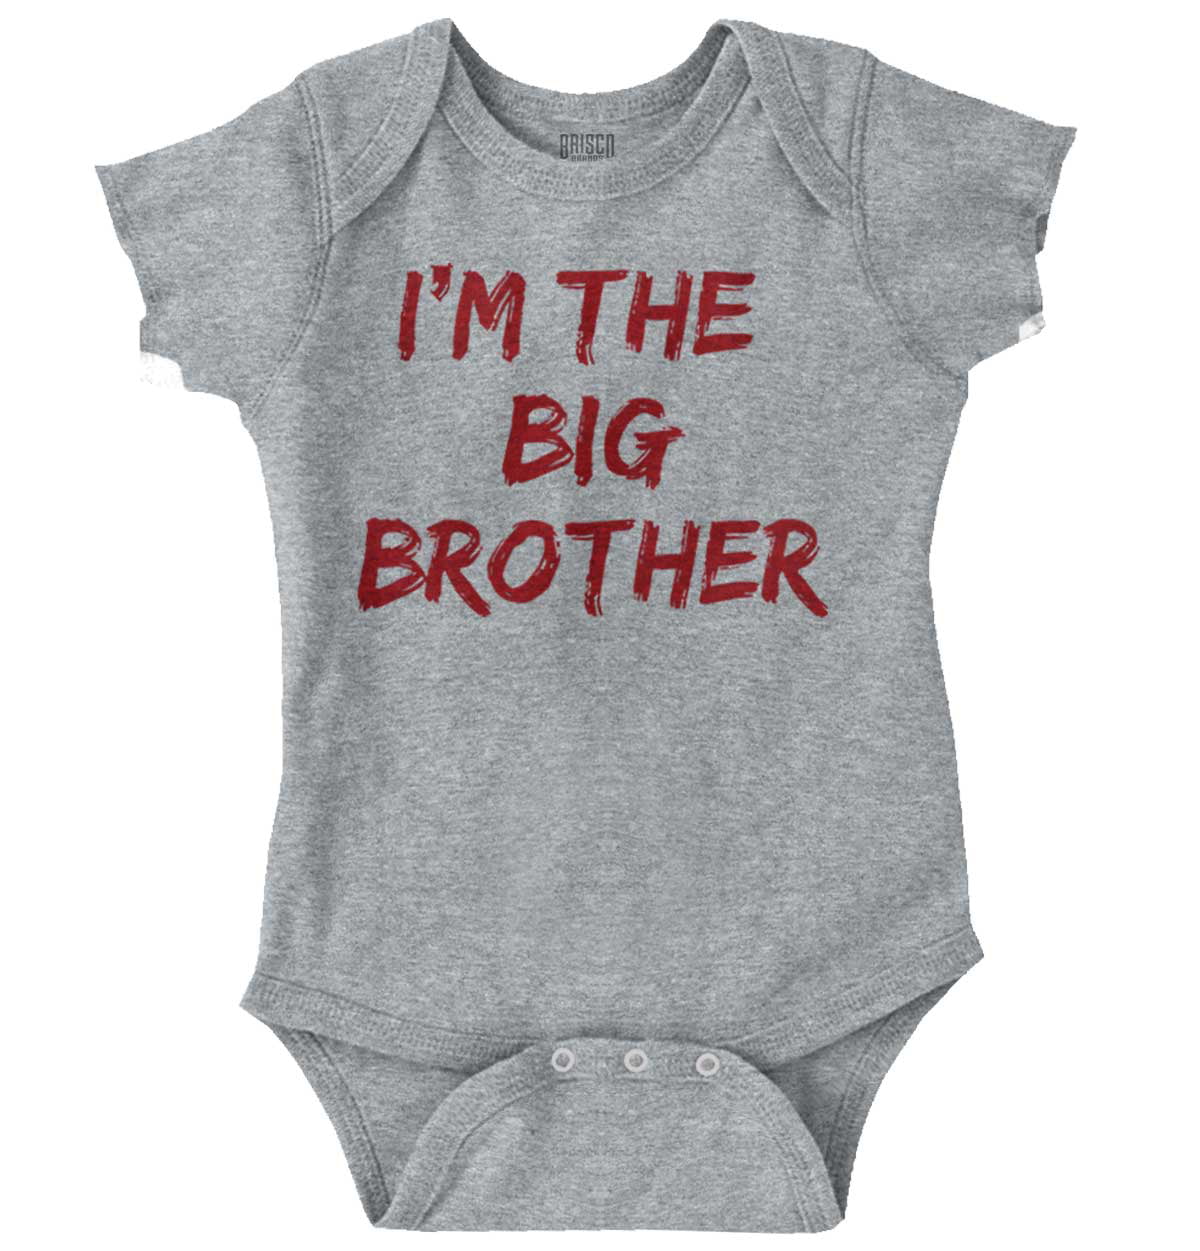 Patriotic T-shirt Funny Boys Shirt Brothers T-shirt Baby Announcement Funny Brothers Shirt BROS BEFORE BOWS Baby Shower Bodysuit